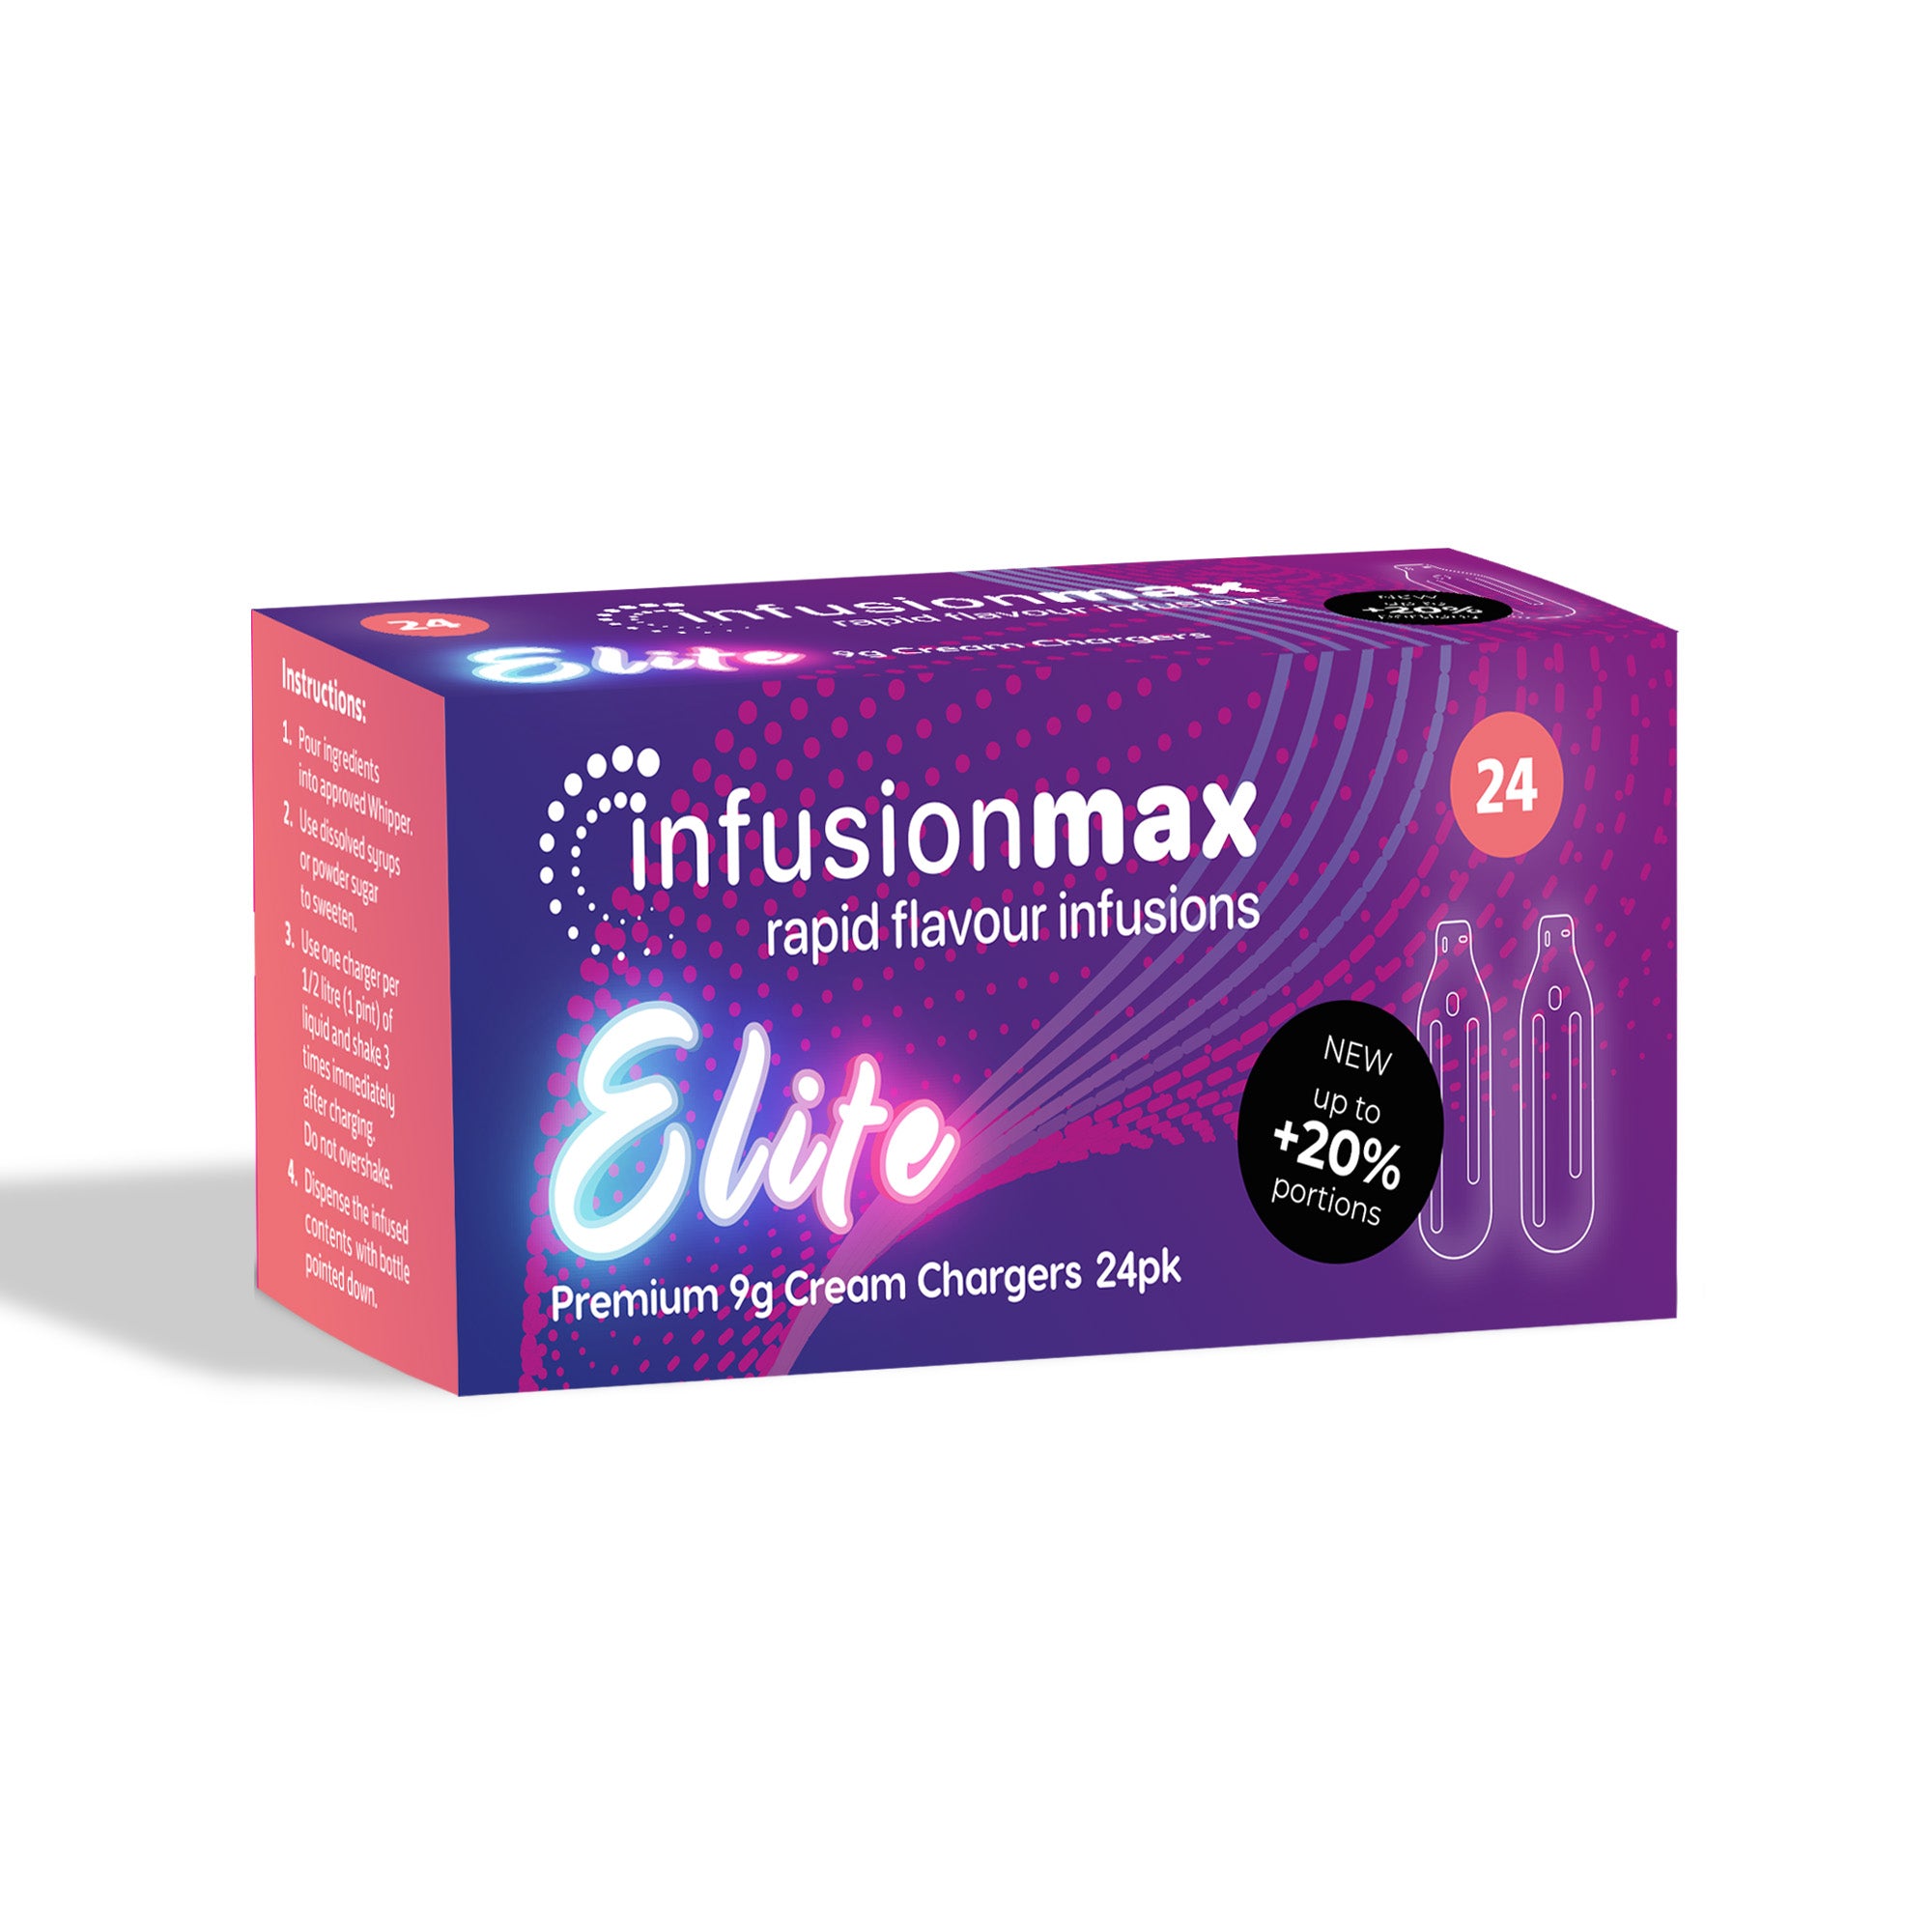 InfusionMax ELITE Cream Chargers - 24 Pack